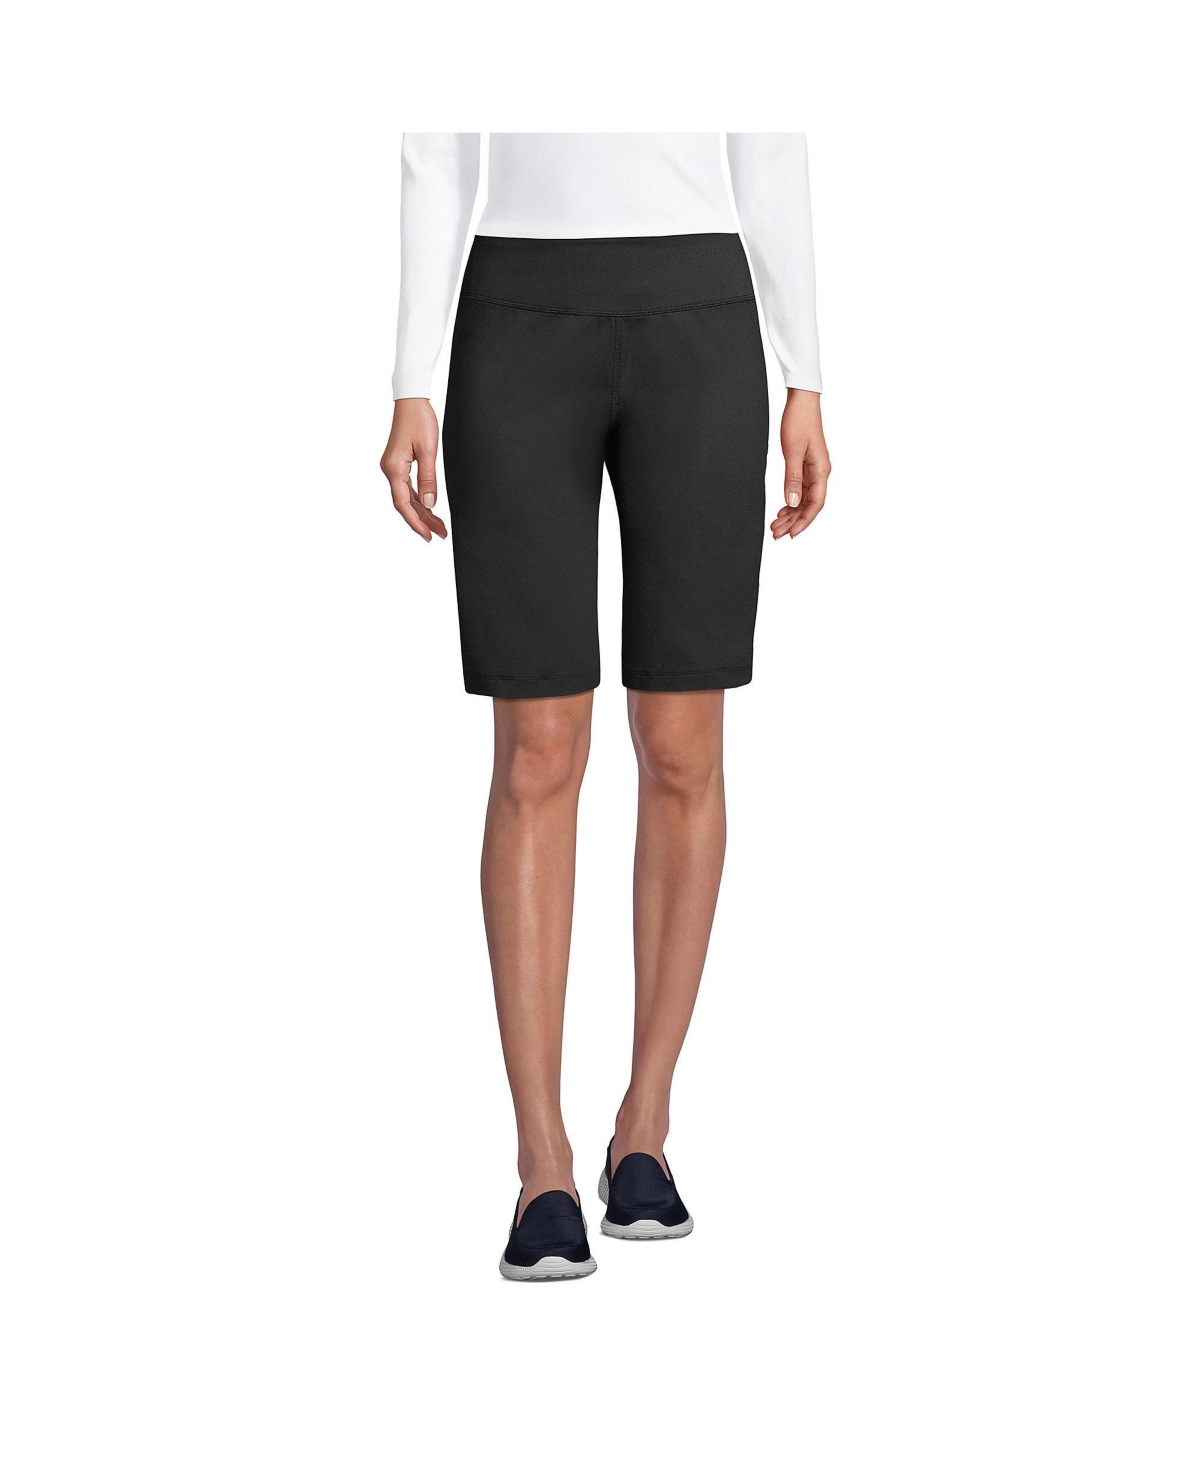 Women's Active Relaxed Shorts - Black